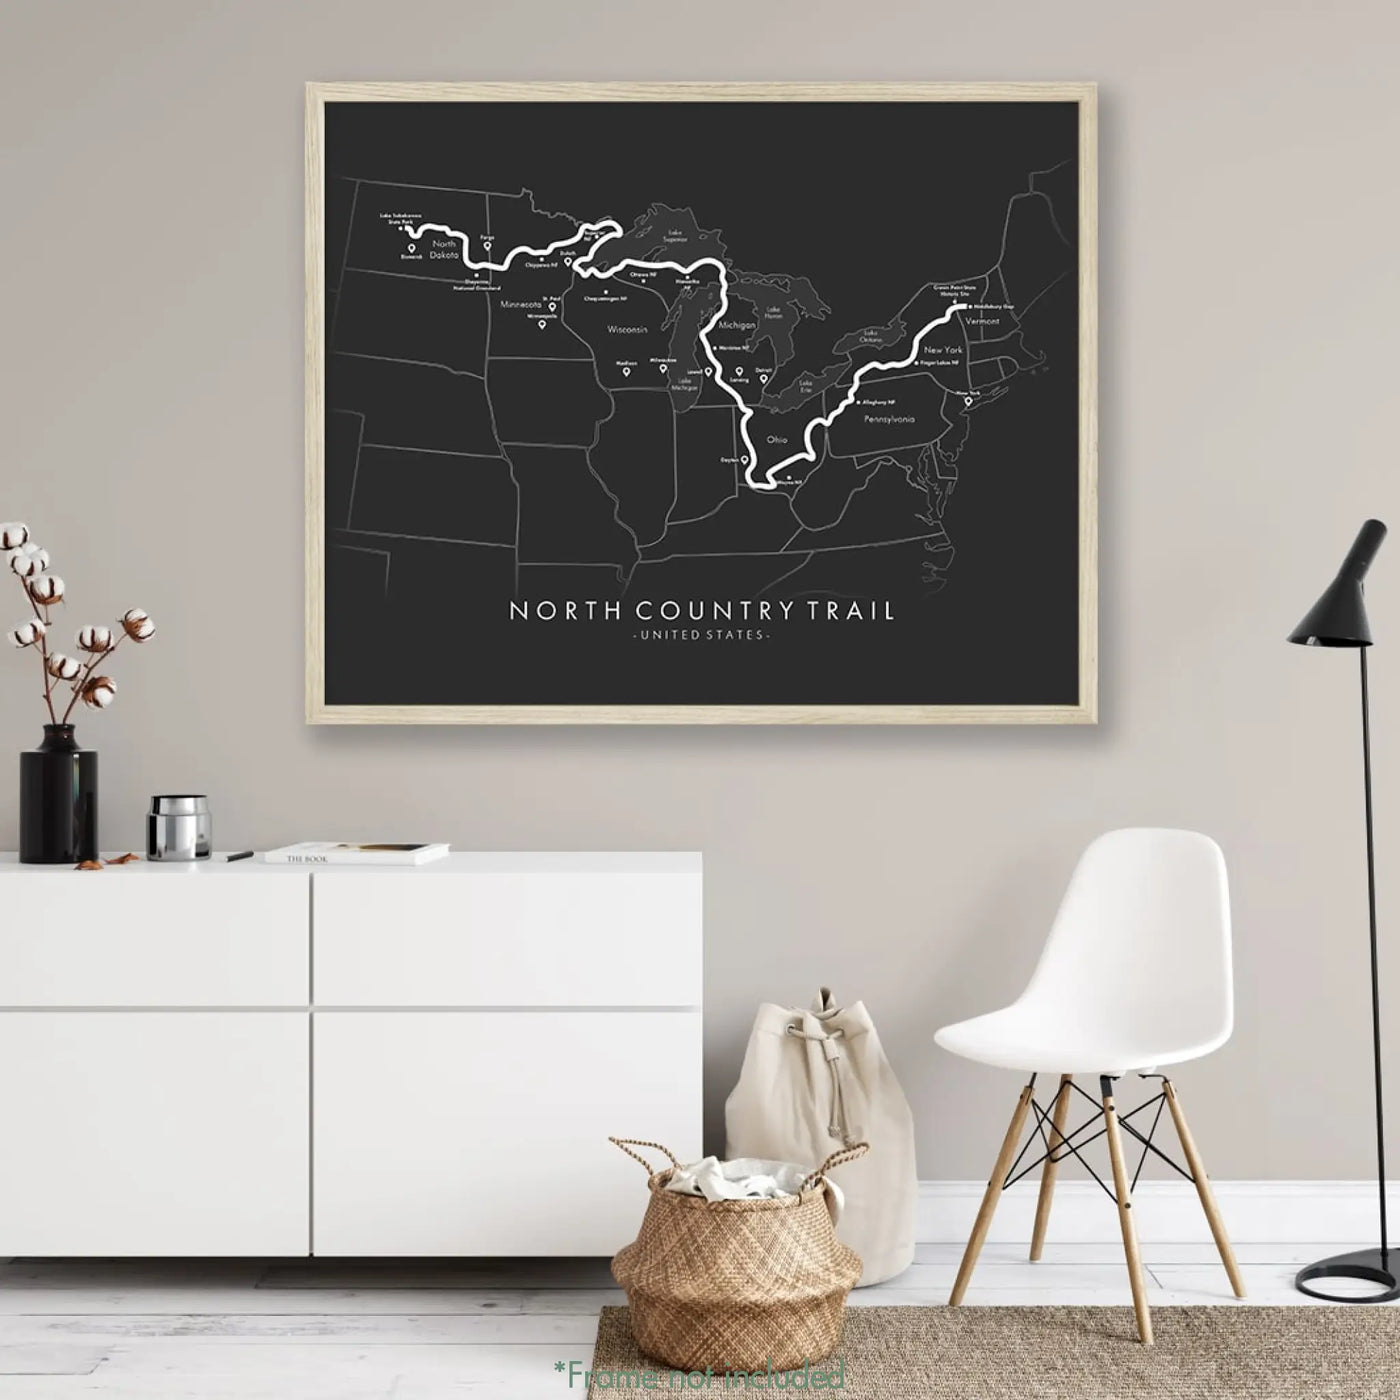 Trail Poster of North Country National Scenic Trail - Grey Mockup